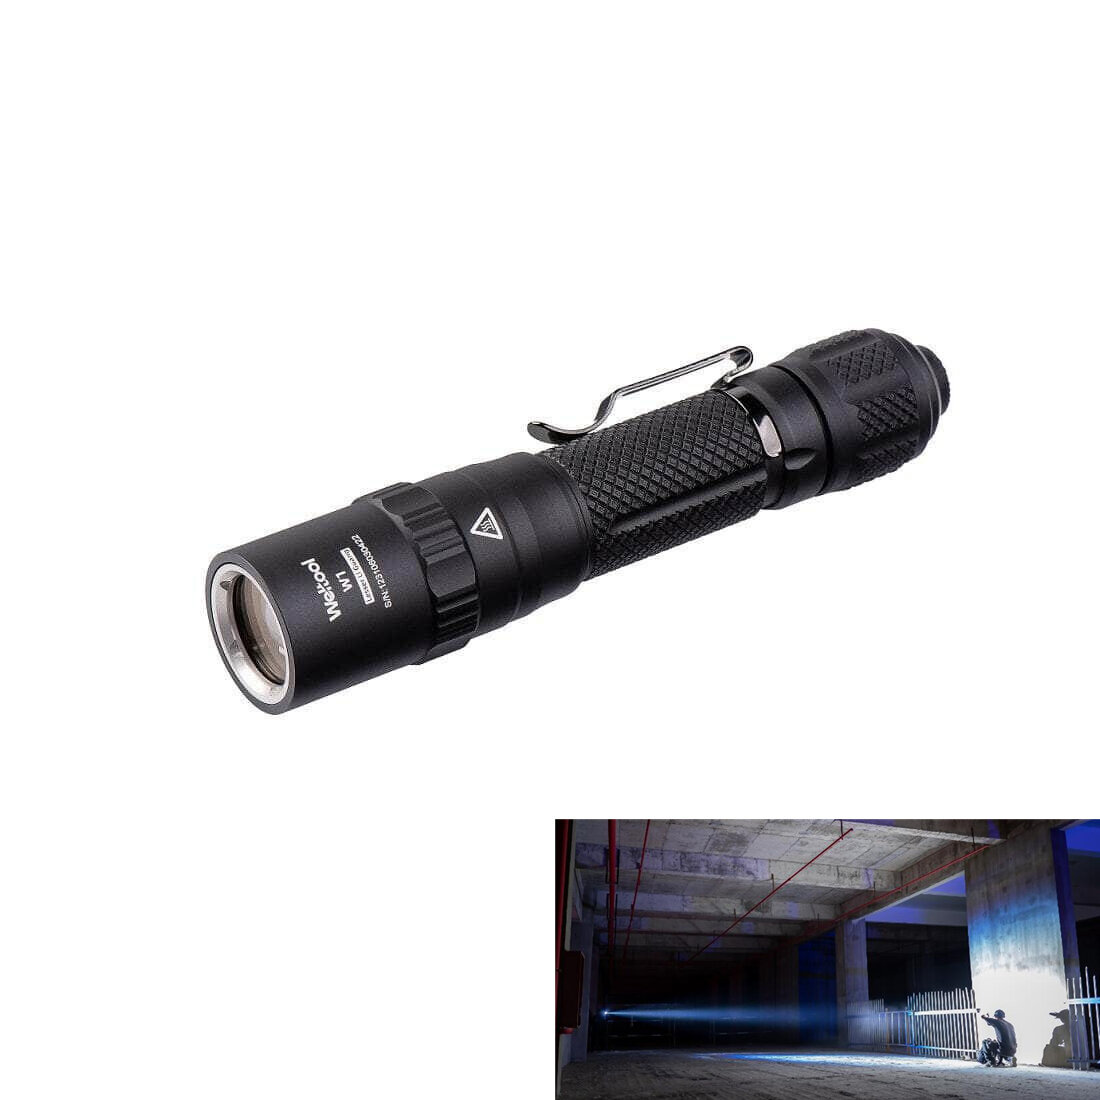 Weltool W1 LEP Flashlight 630LM 18650 Battery Powerful Torch with Spill